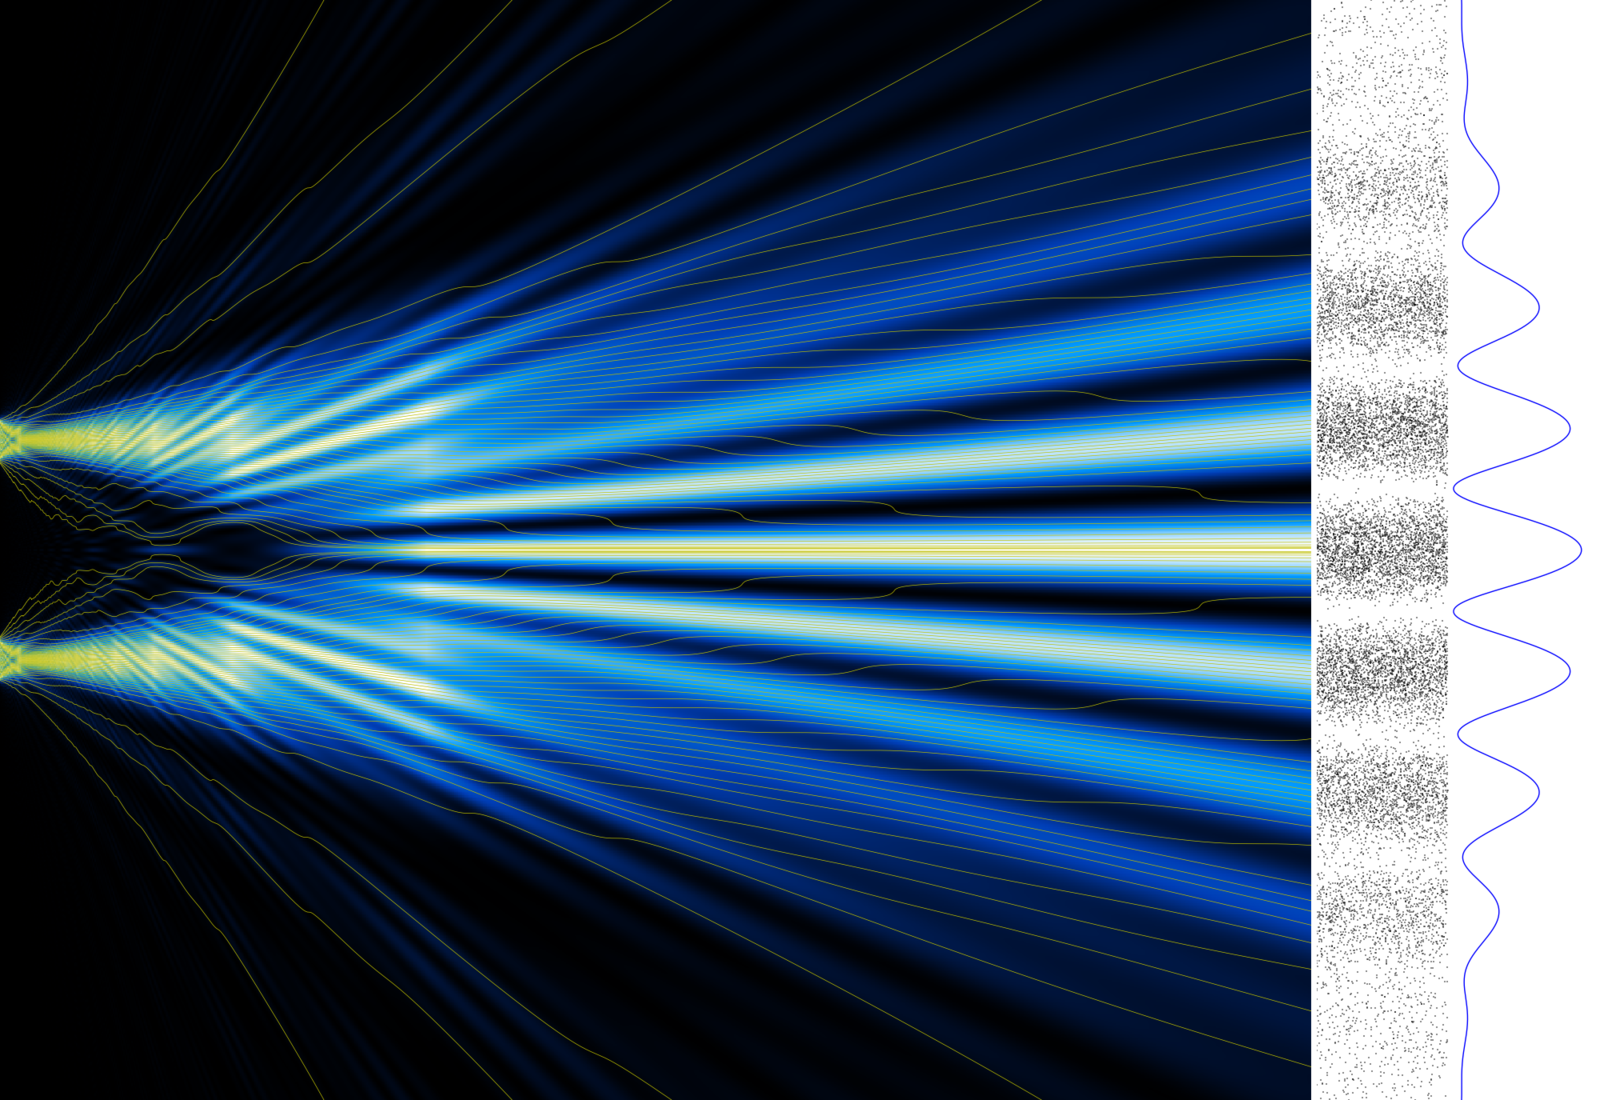 Visualization of electron paths in the double-slit experiment